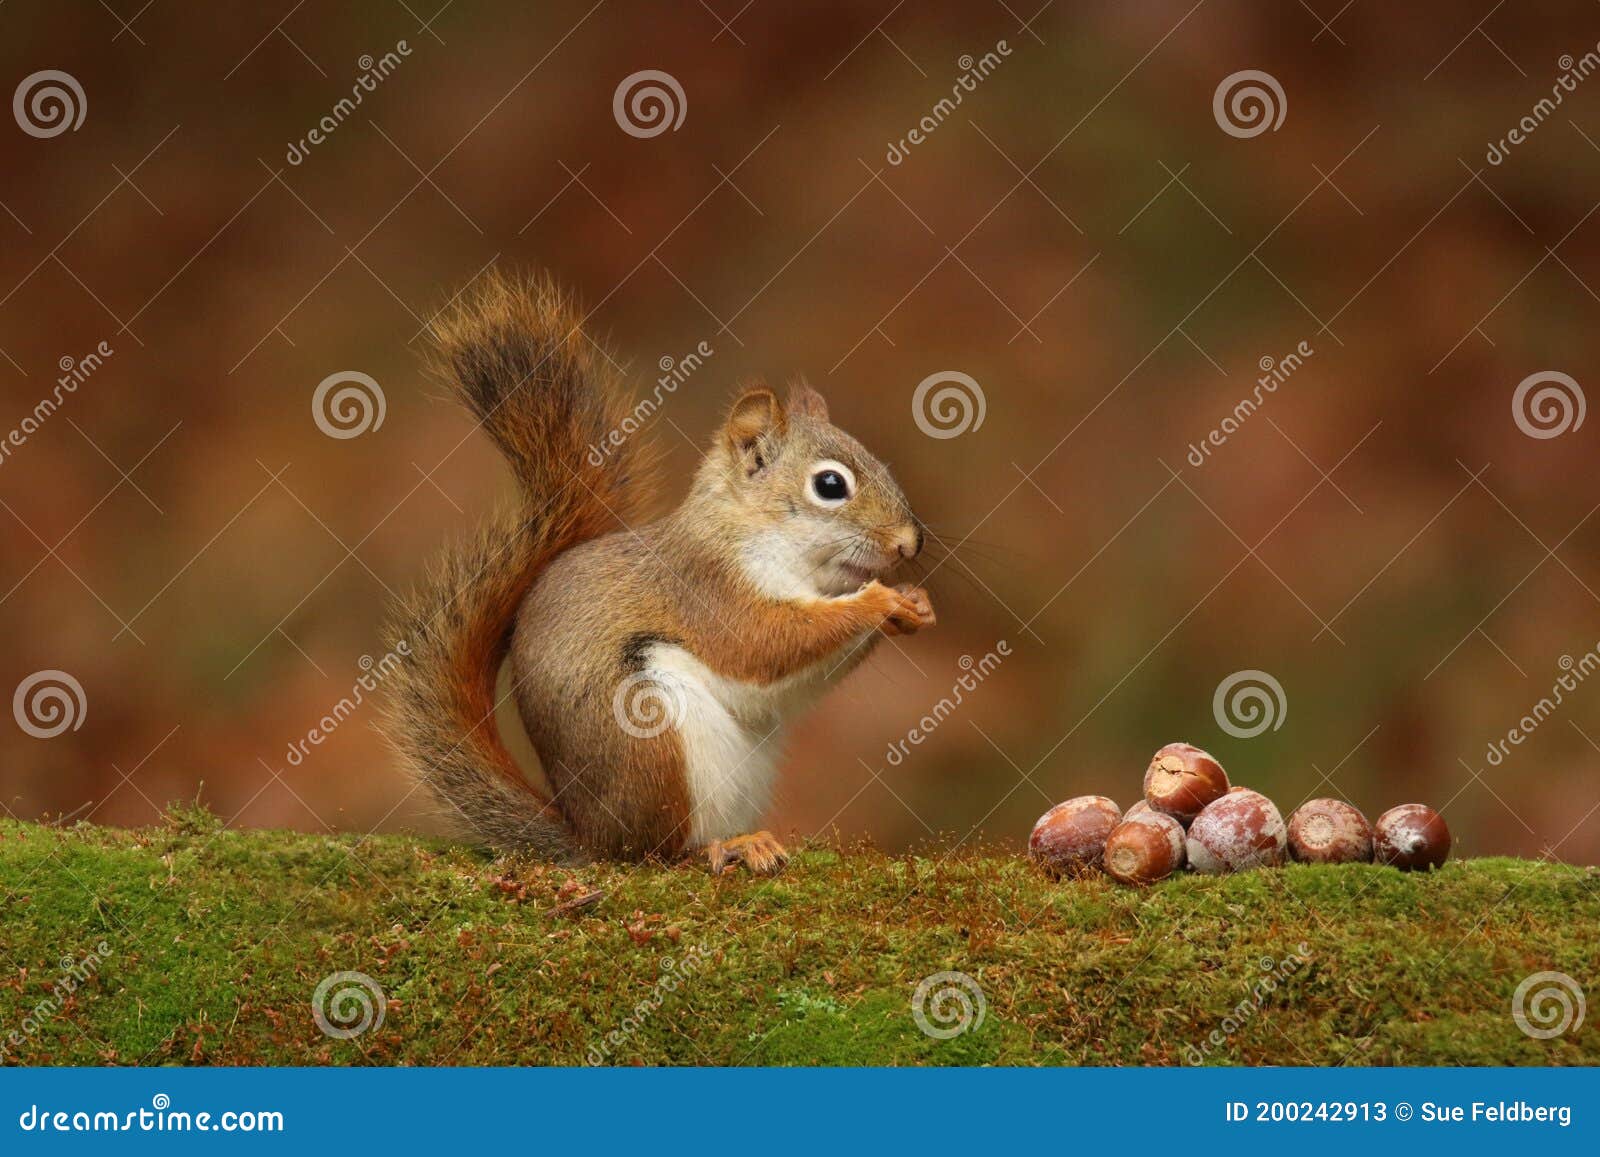 cute little red squirrel sitting on a branch eating acorns in fall